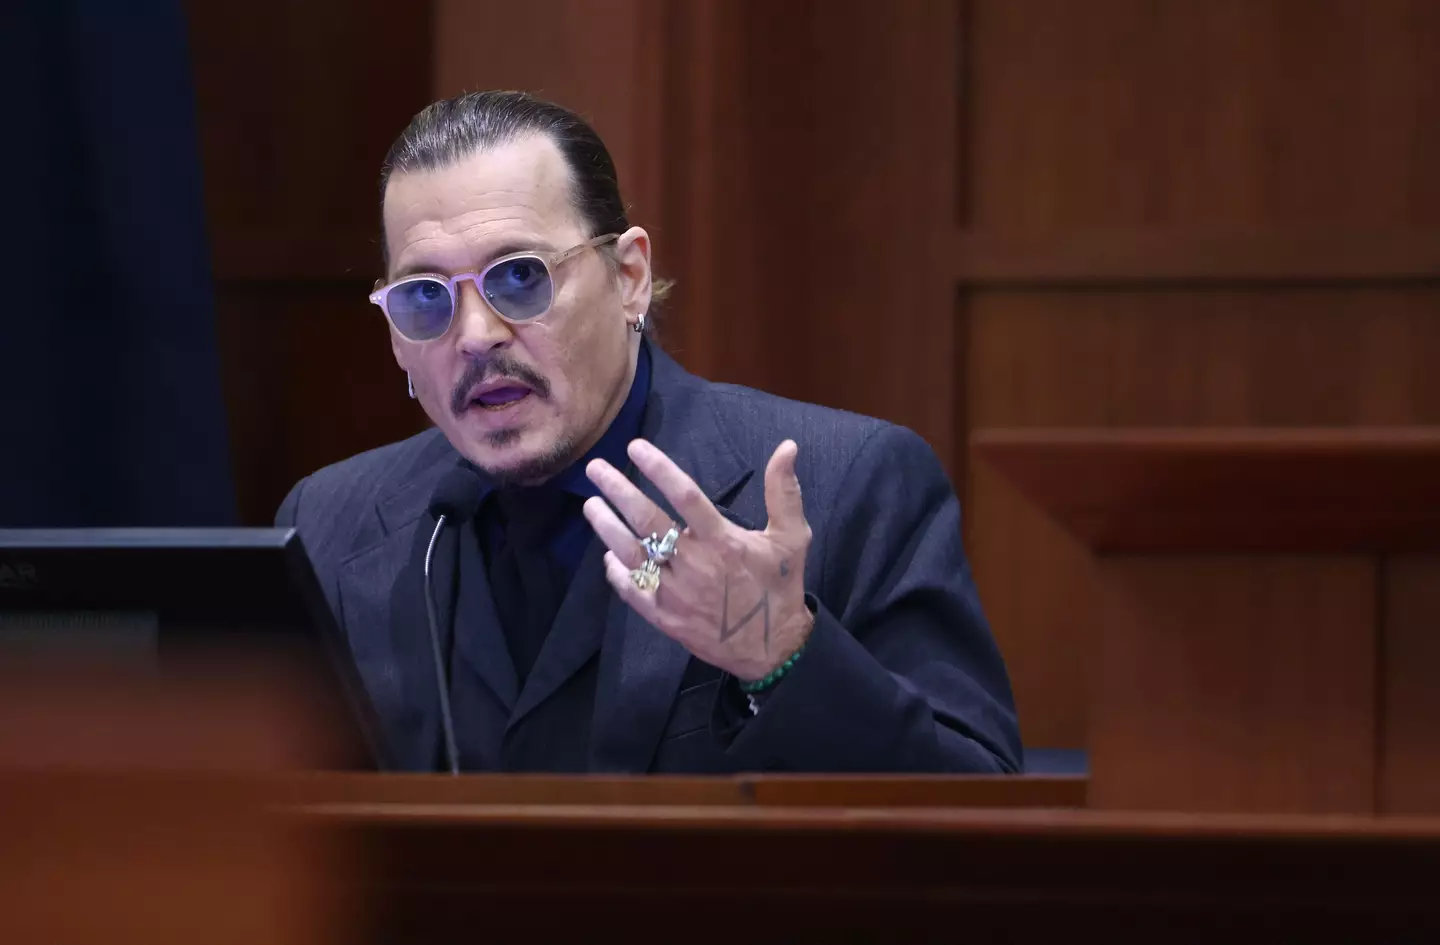 Stern also attacked Johnny Depp's accent during the trial.